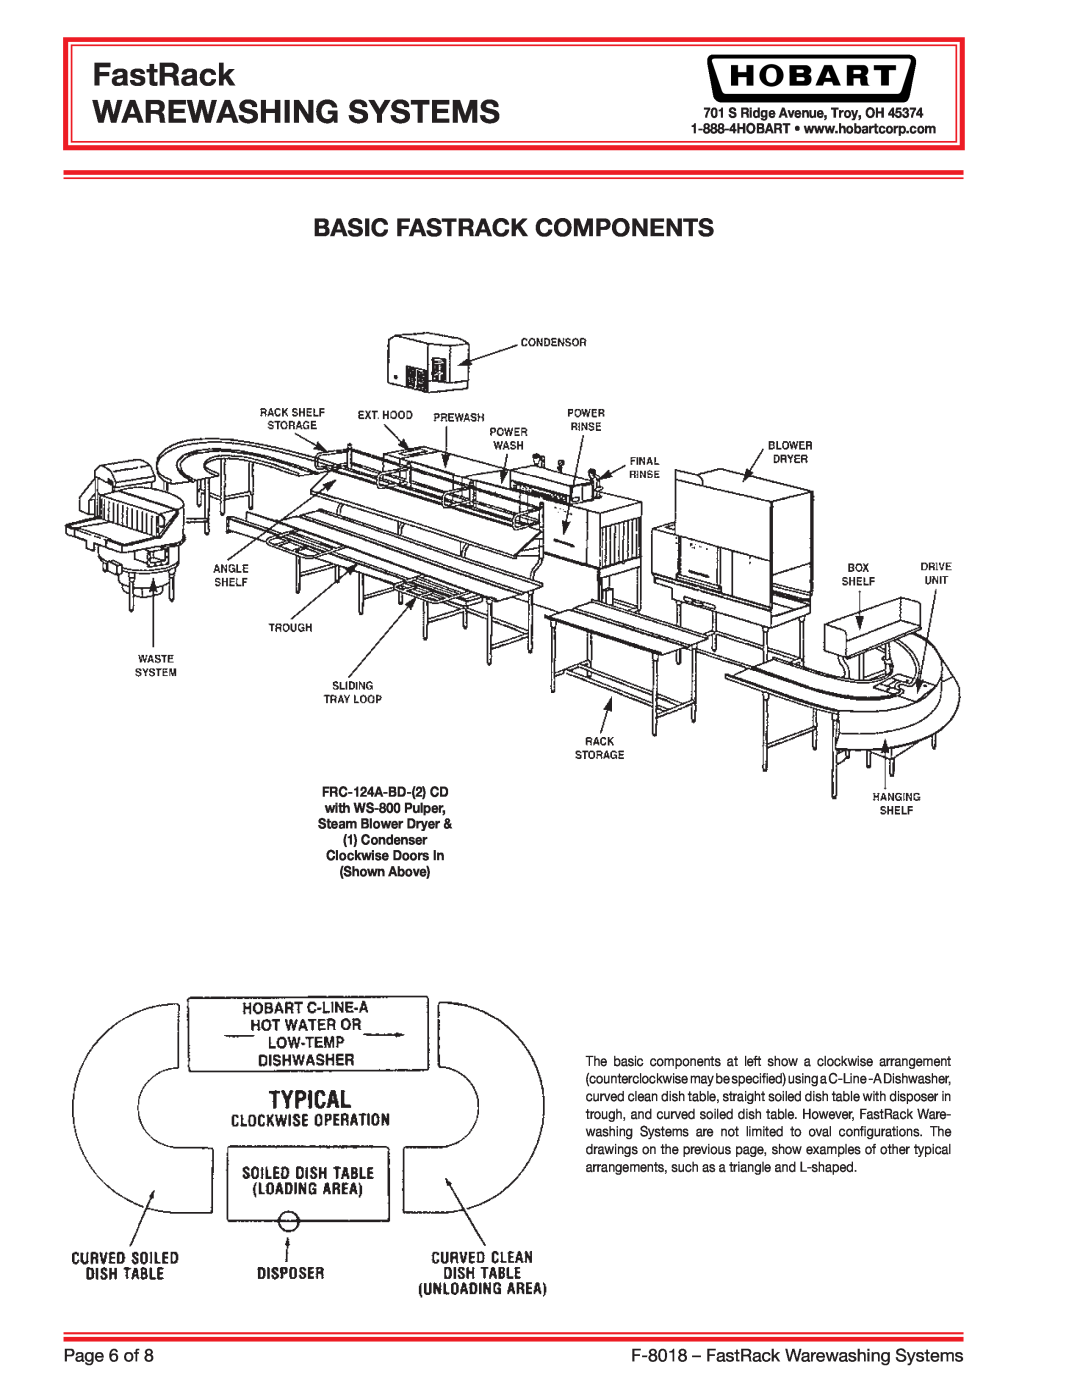 Hobart F-8018 specifications Basic Fastrack Components, FastRack WAREWASHING SYSTEMS, S Ridge Avenue, Troy, OH, Shown Above 